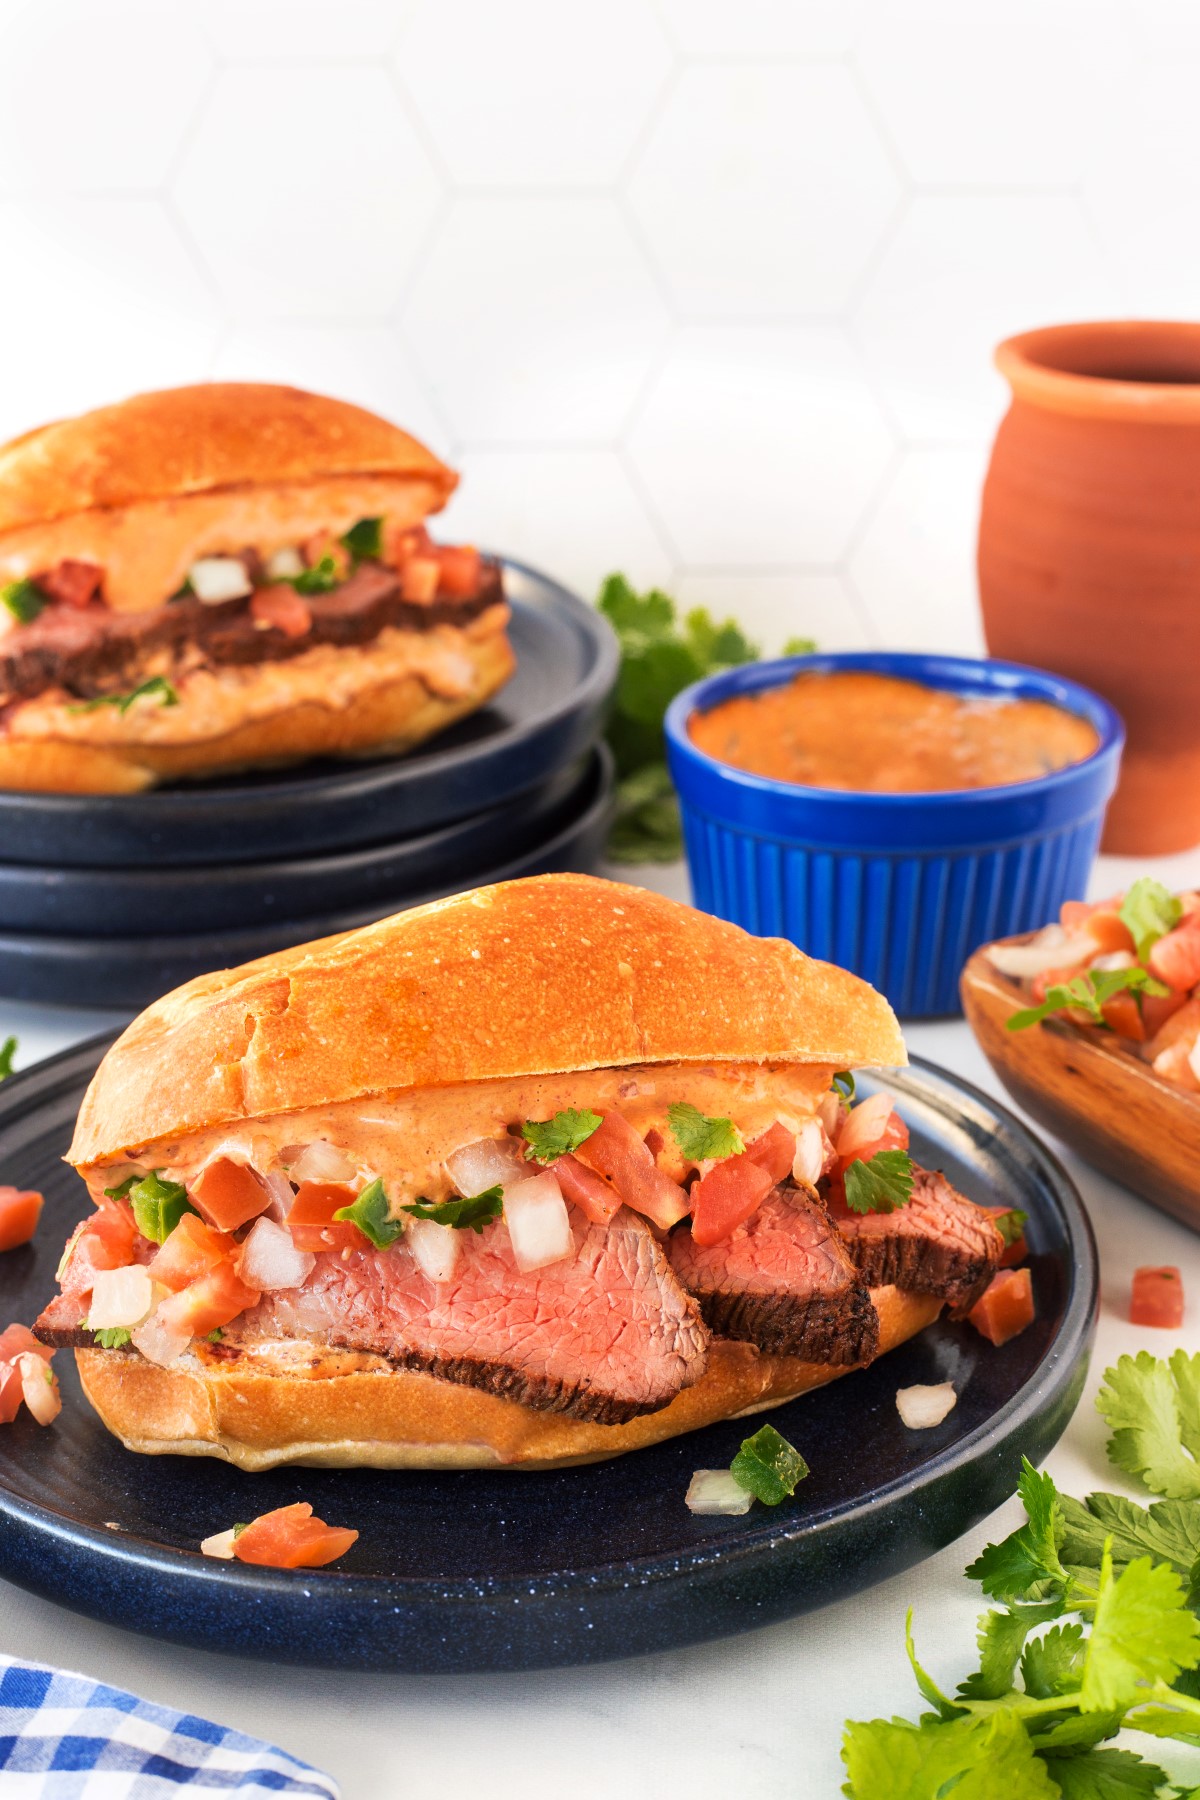 Grilled Tri-tip sandwich with chipotle mayo and pica de gallo on a black plate.
